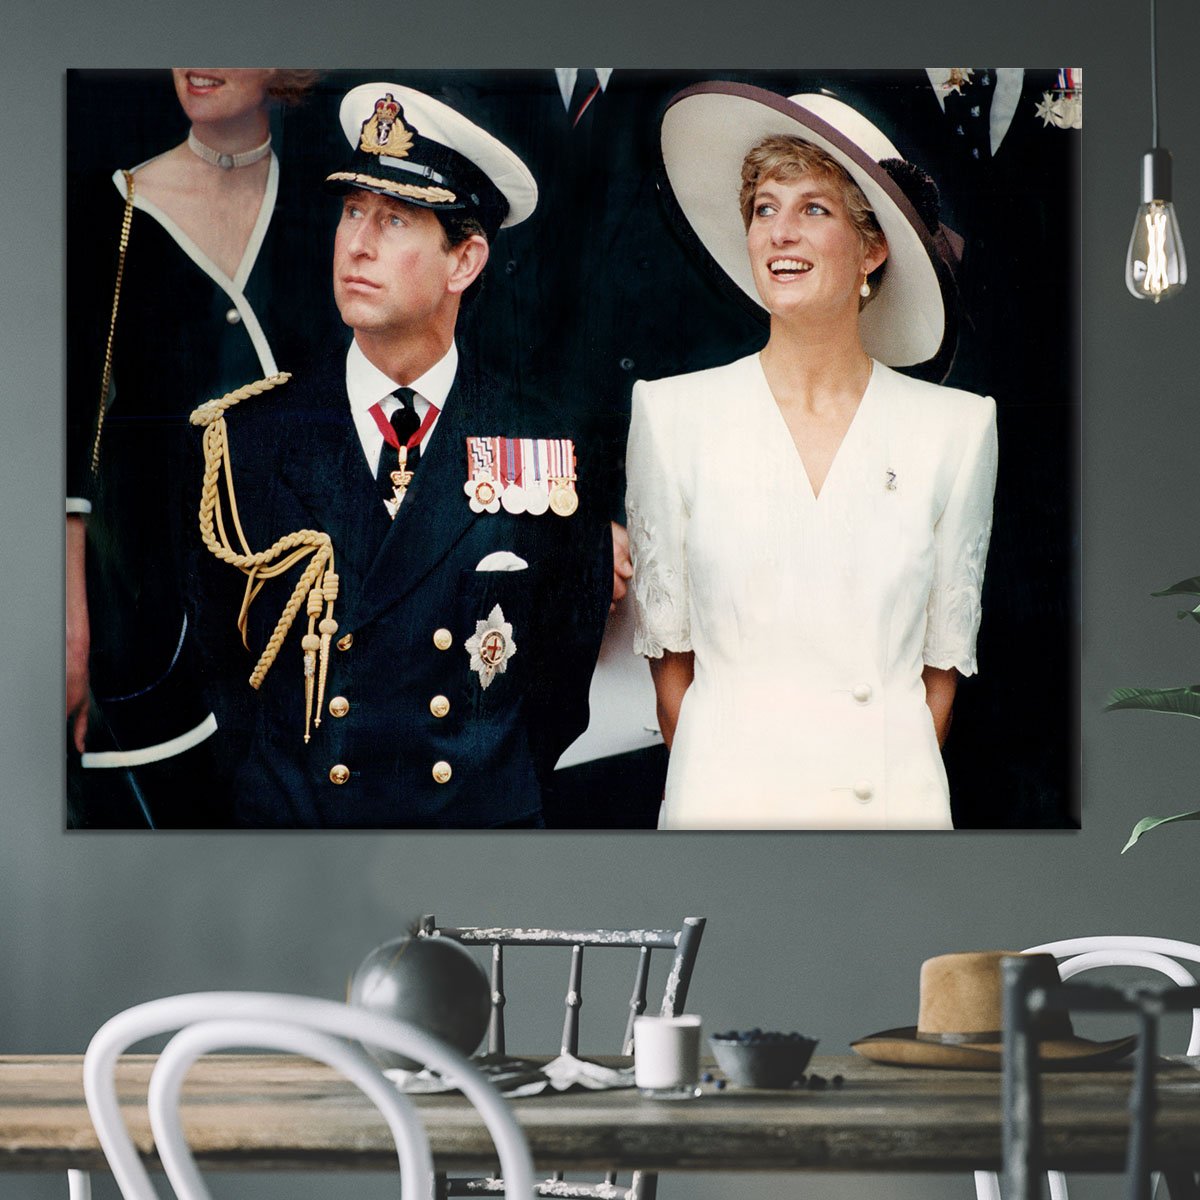 Prince Charles with Princess Diana British forces homecoming Canvas Print or Poster